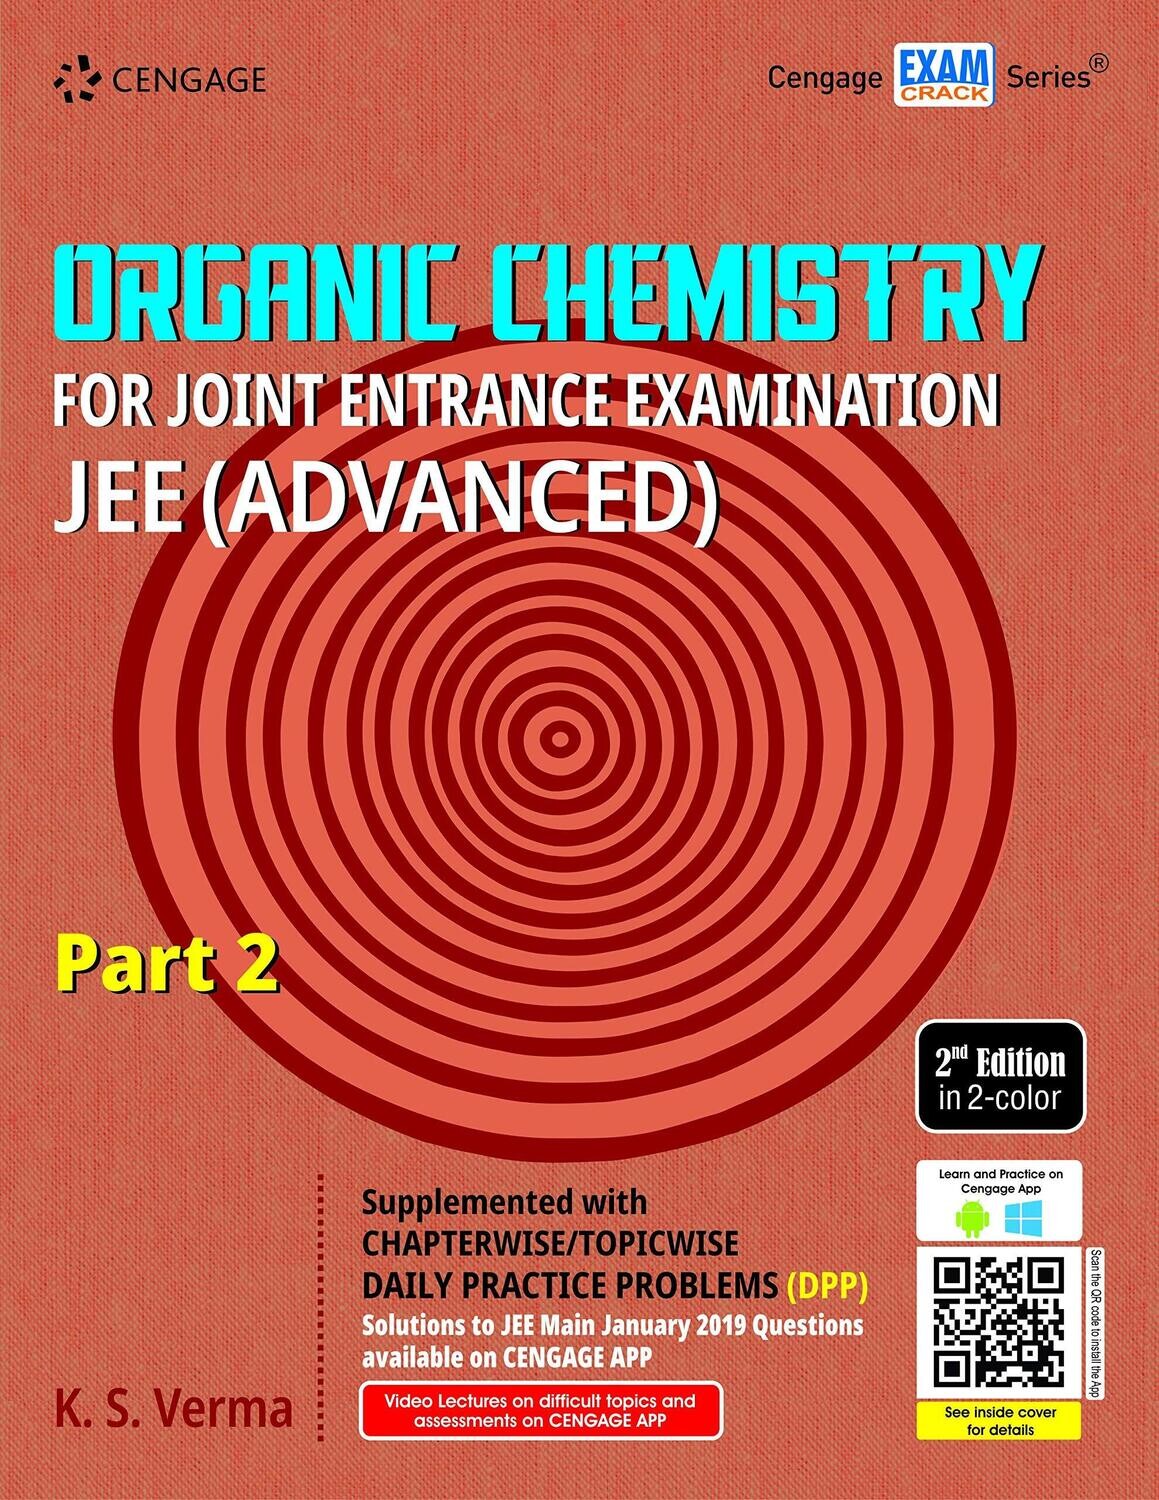 Organic Chemistry for Joint Entrance Examination JEE (Advanced): Part 2 by K S Verma